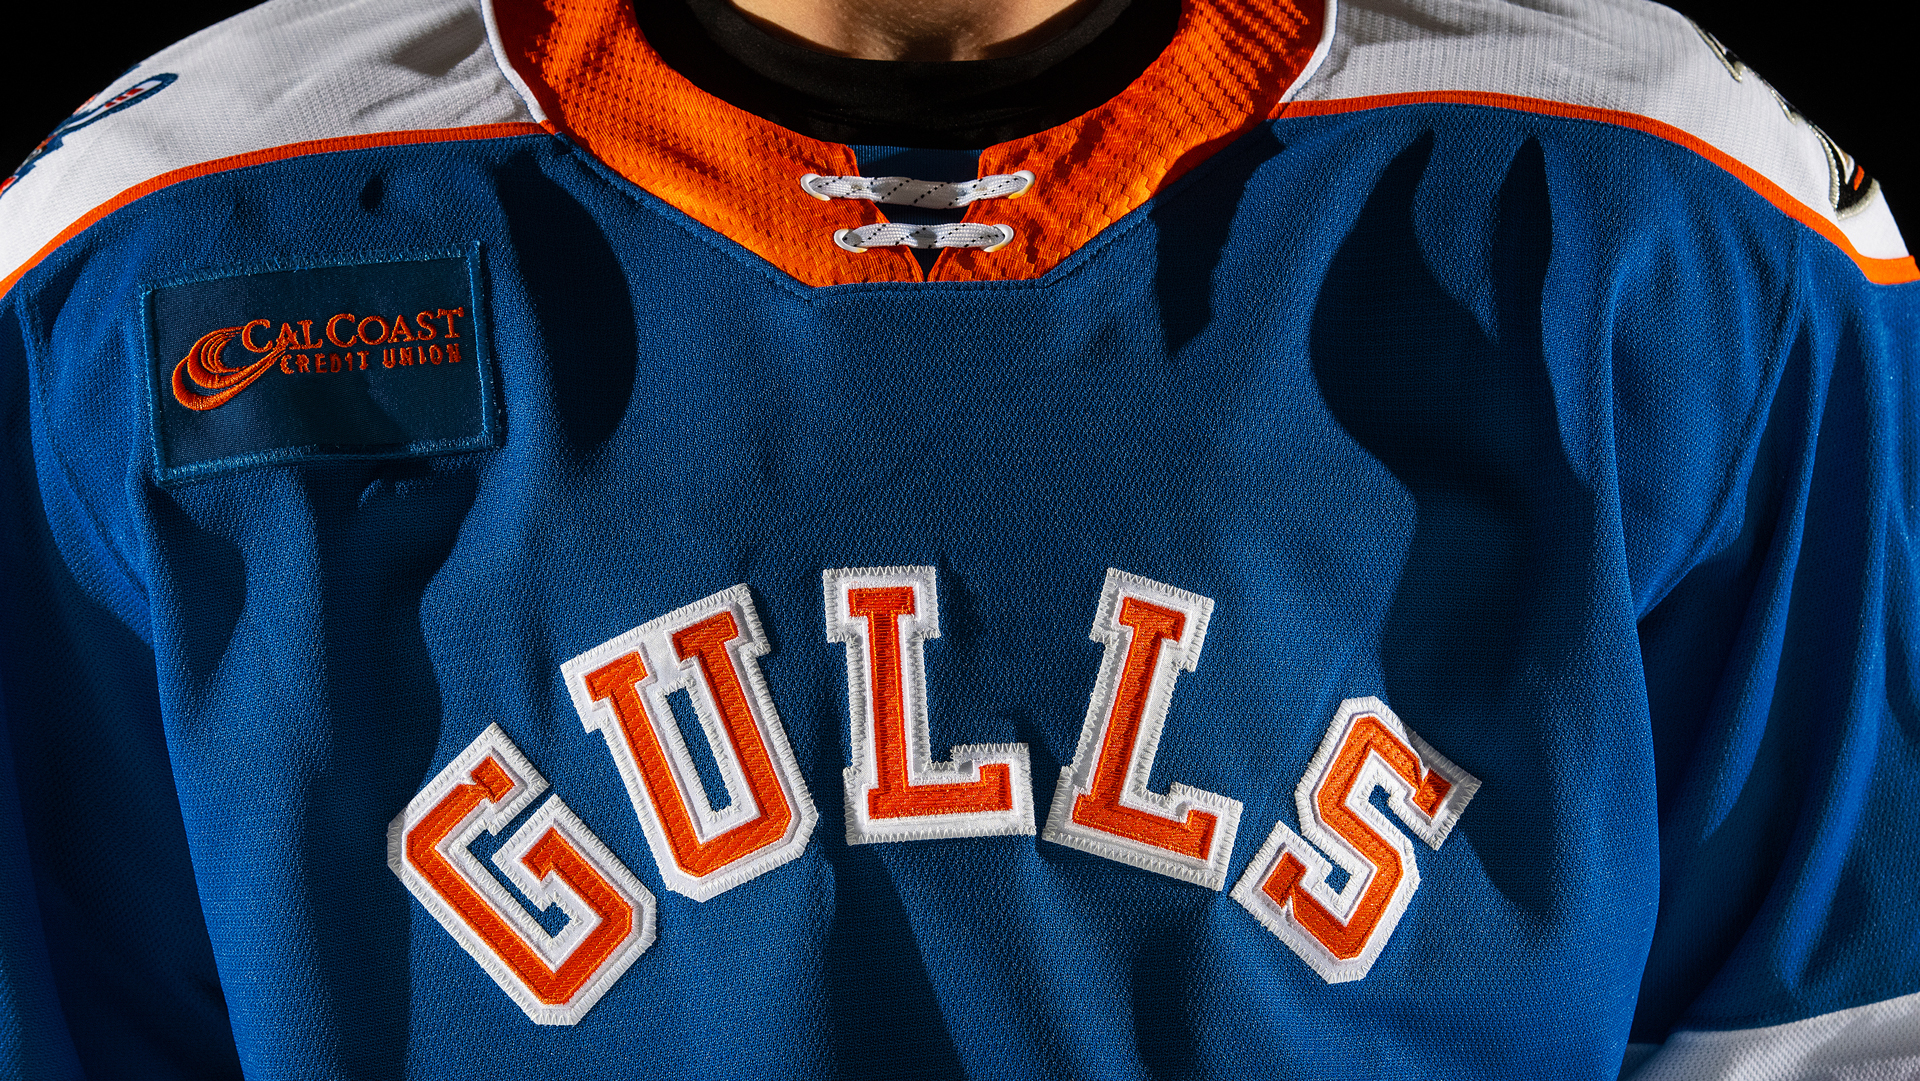  New leak provides detailed look at Ducks' third jersey